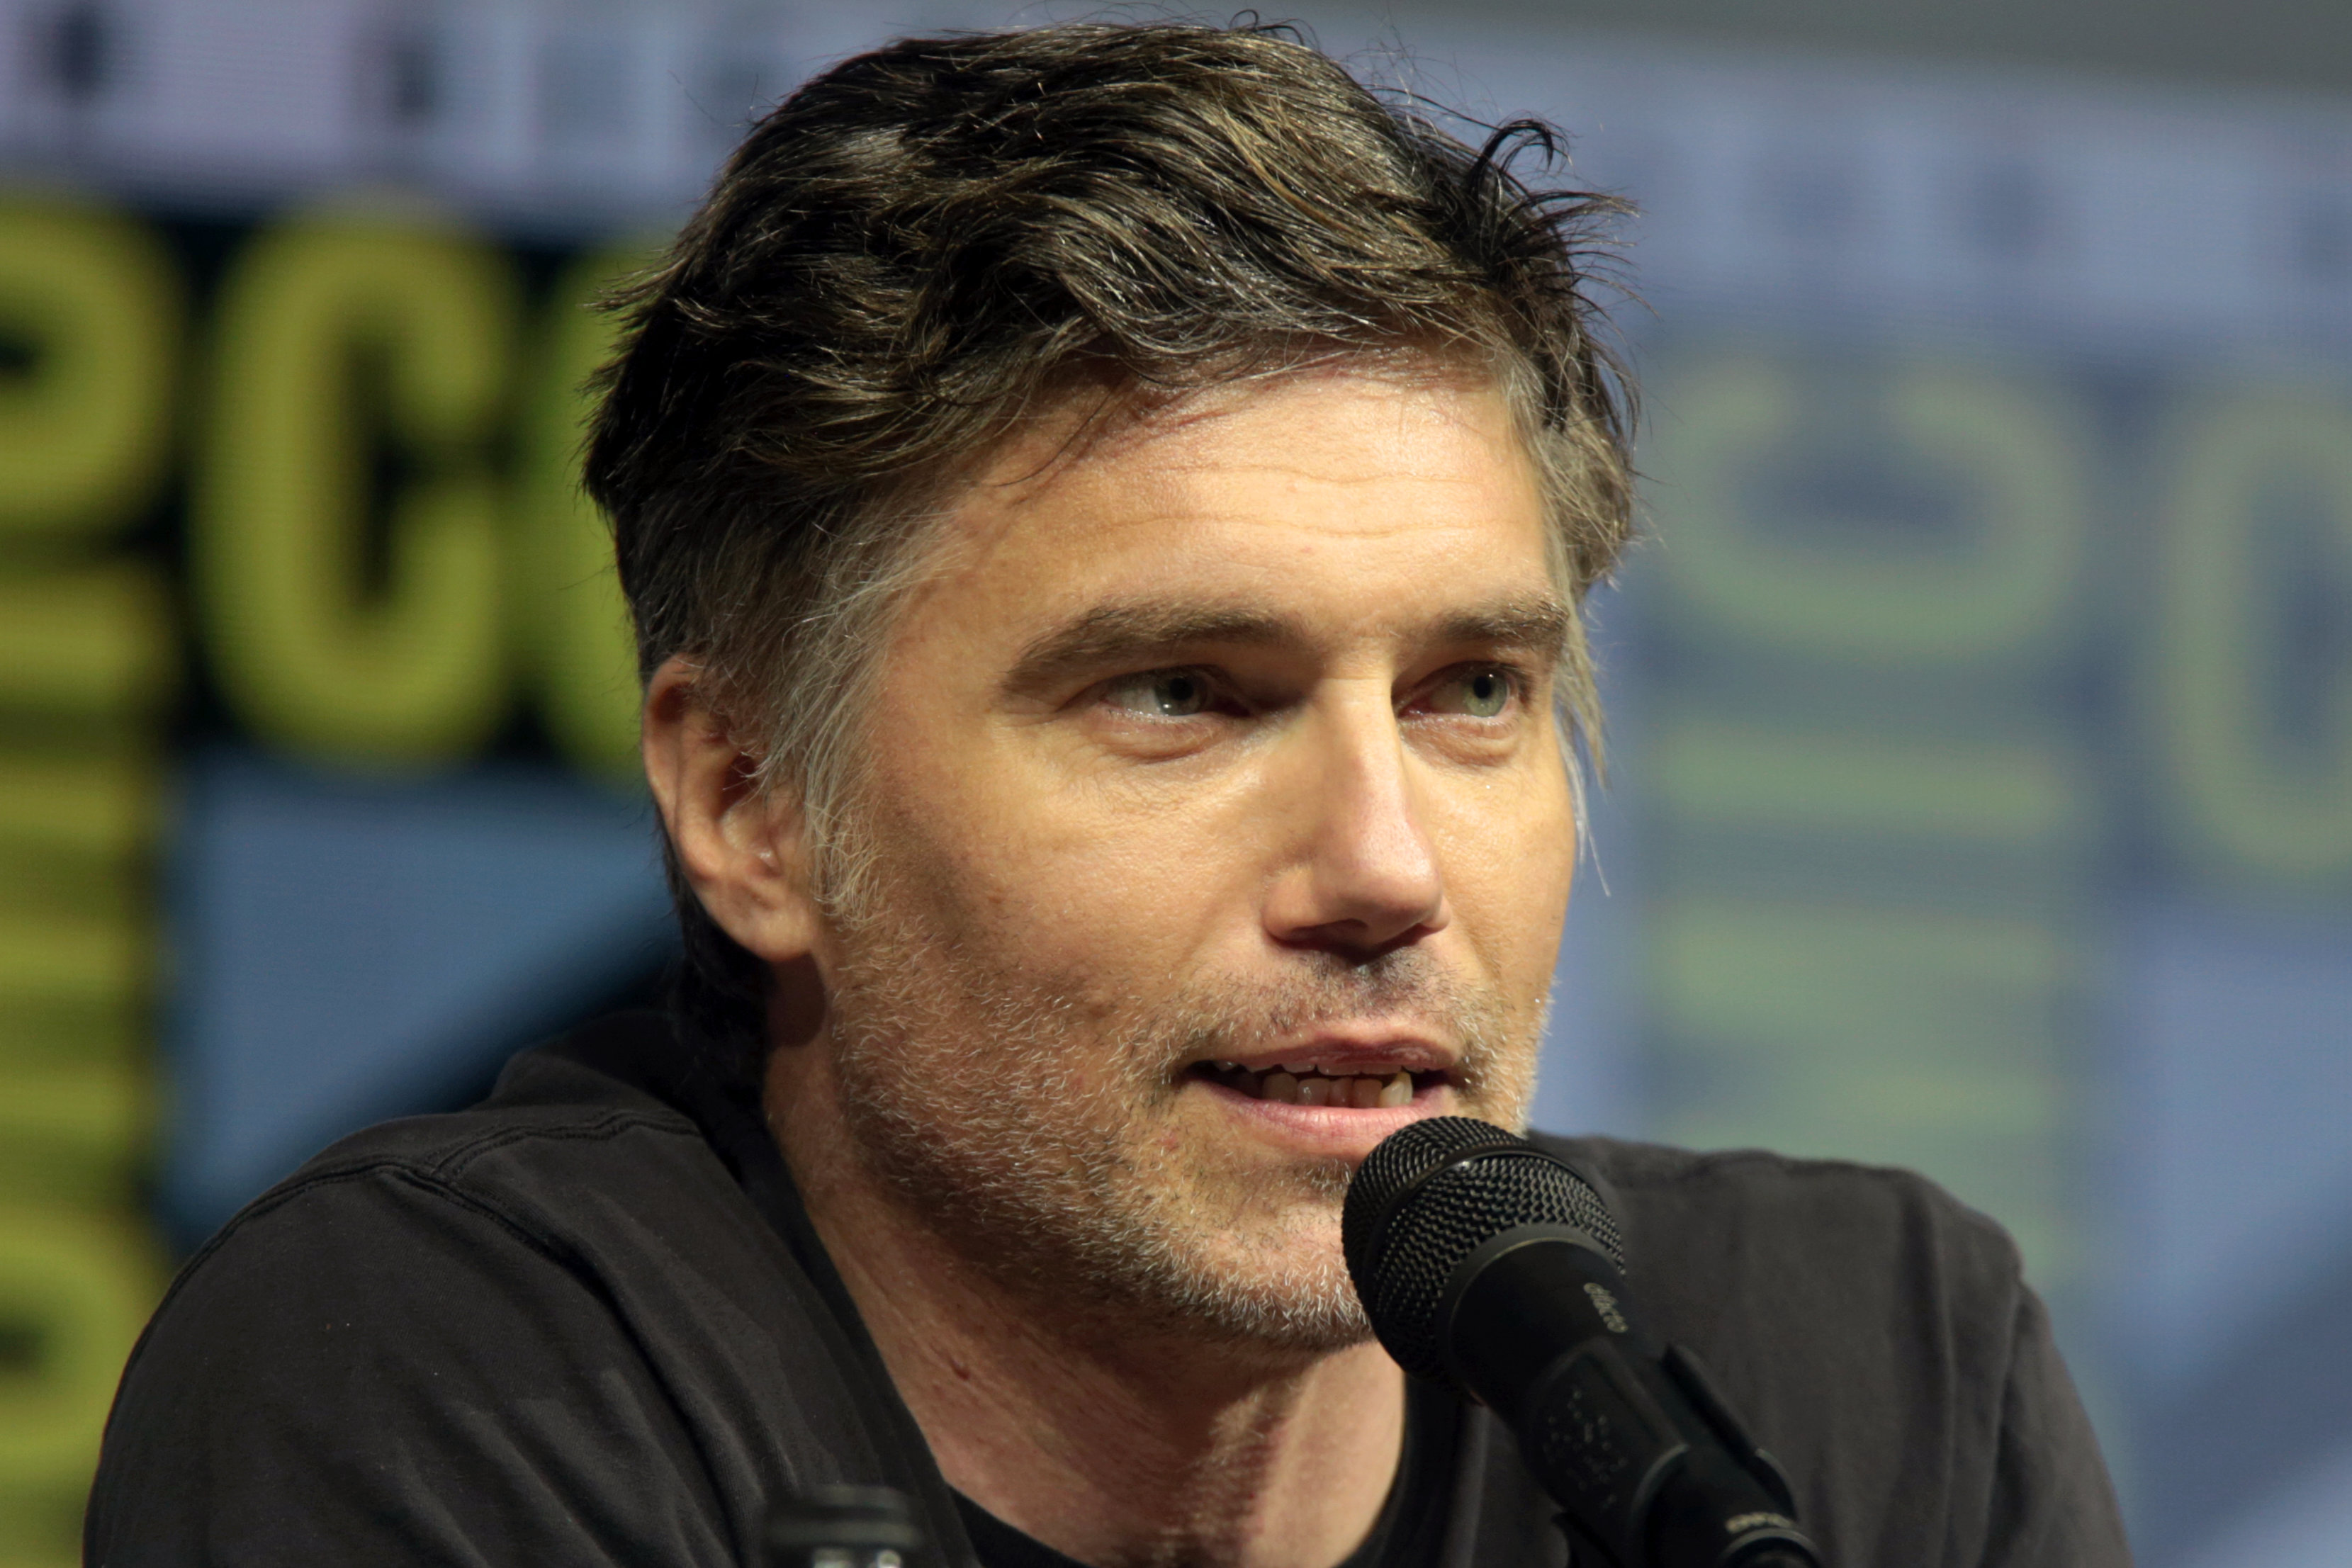 Anson Mount (Photo: CC BY-SA 2.0 Gage Skidmore)